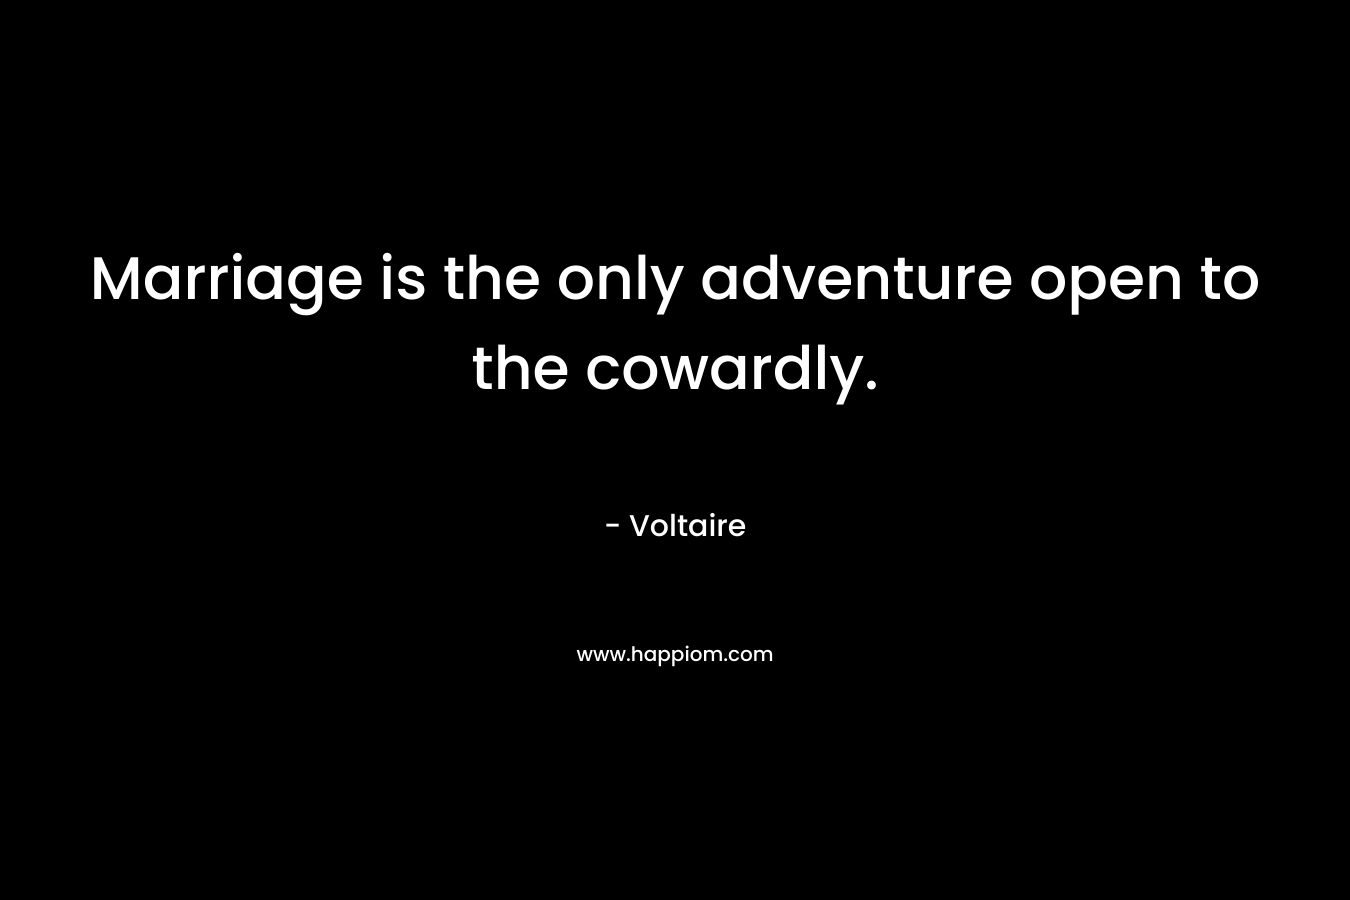 Marriage is the only adventure open to the cowardly.